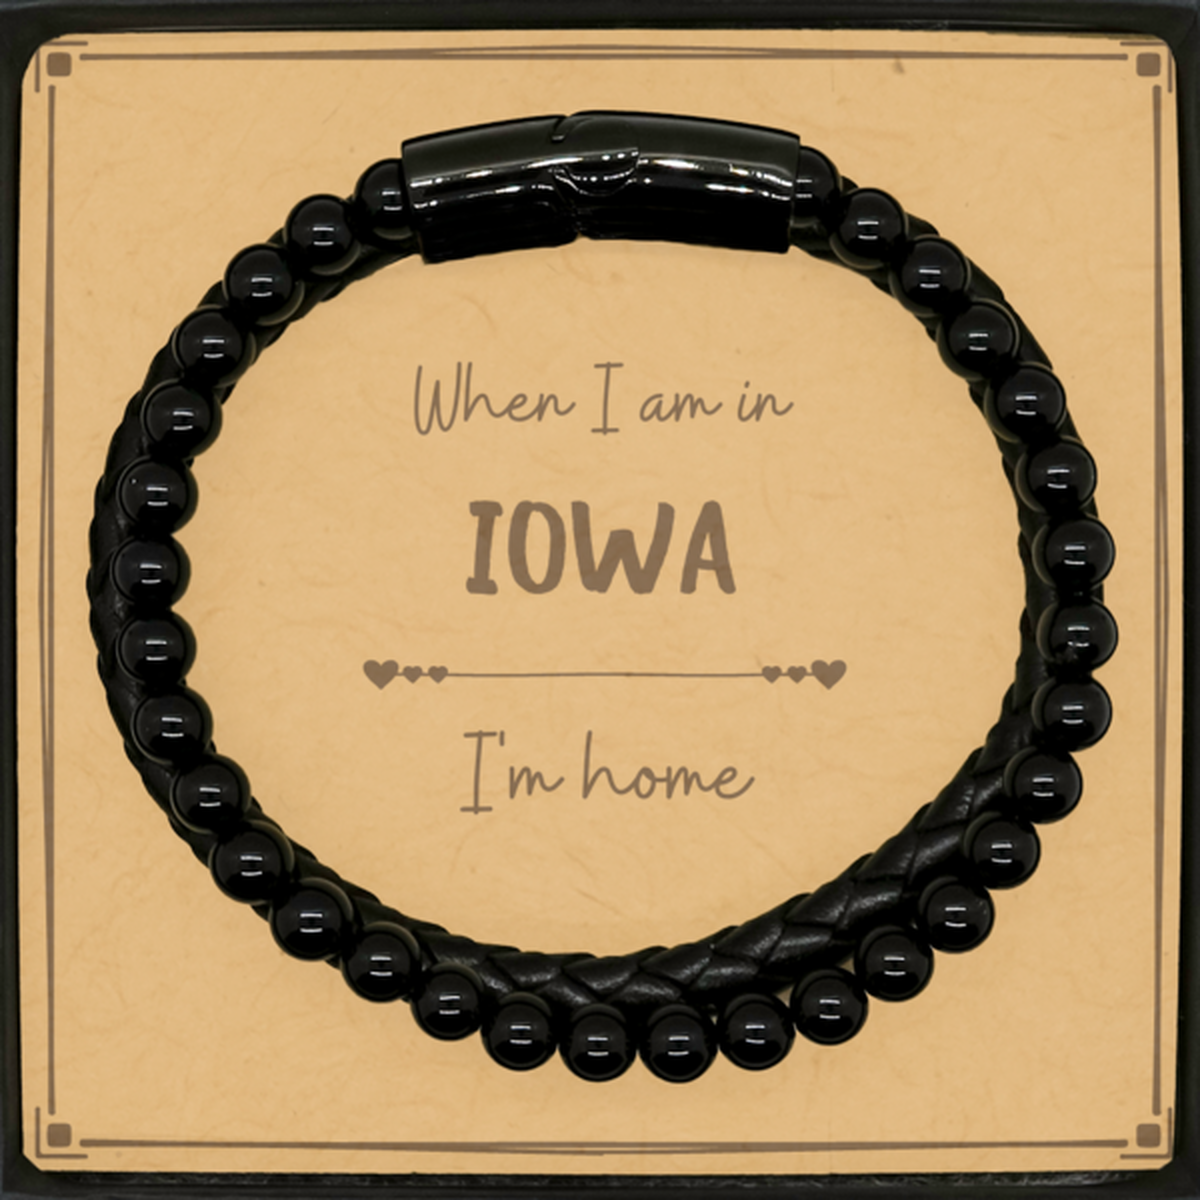 When I am in Iowa I'm home Stone Leather Bracelets, Message Card Gifts For Iowa, State Iowa Birthday Gifts for Friends Coworker